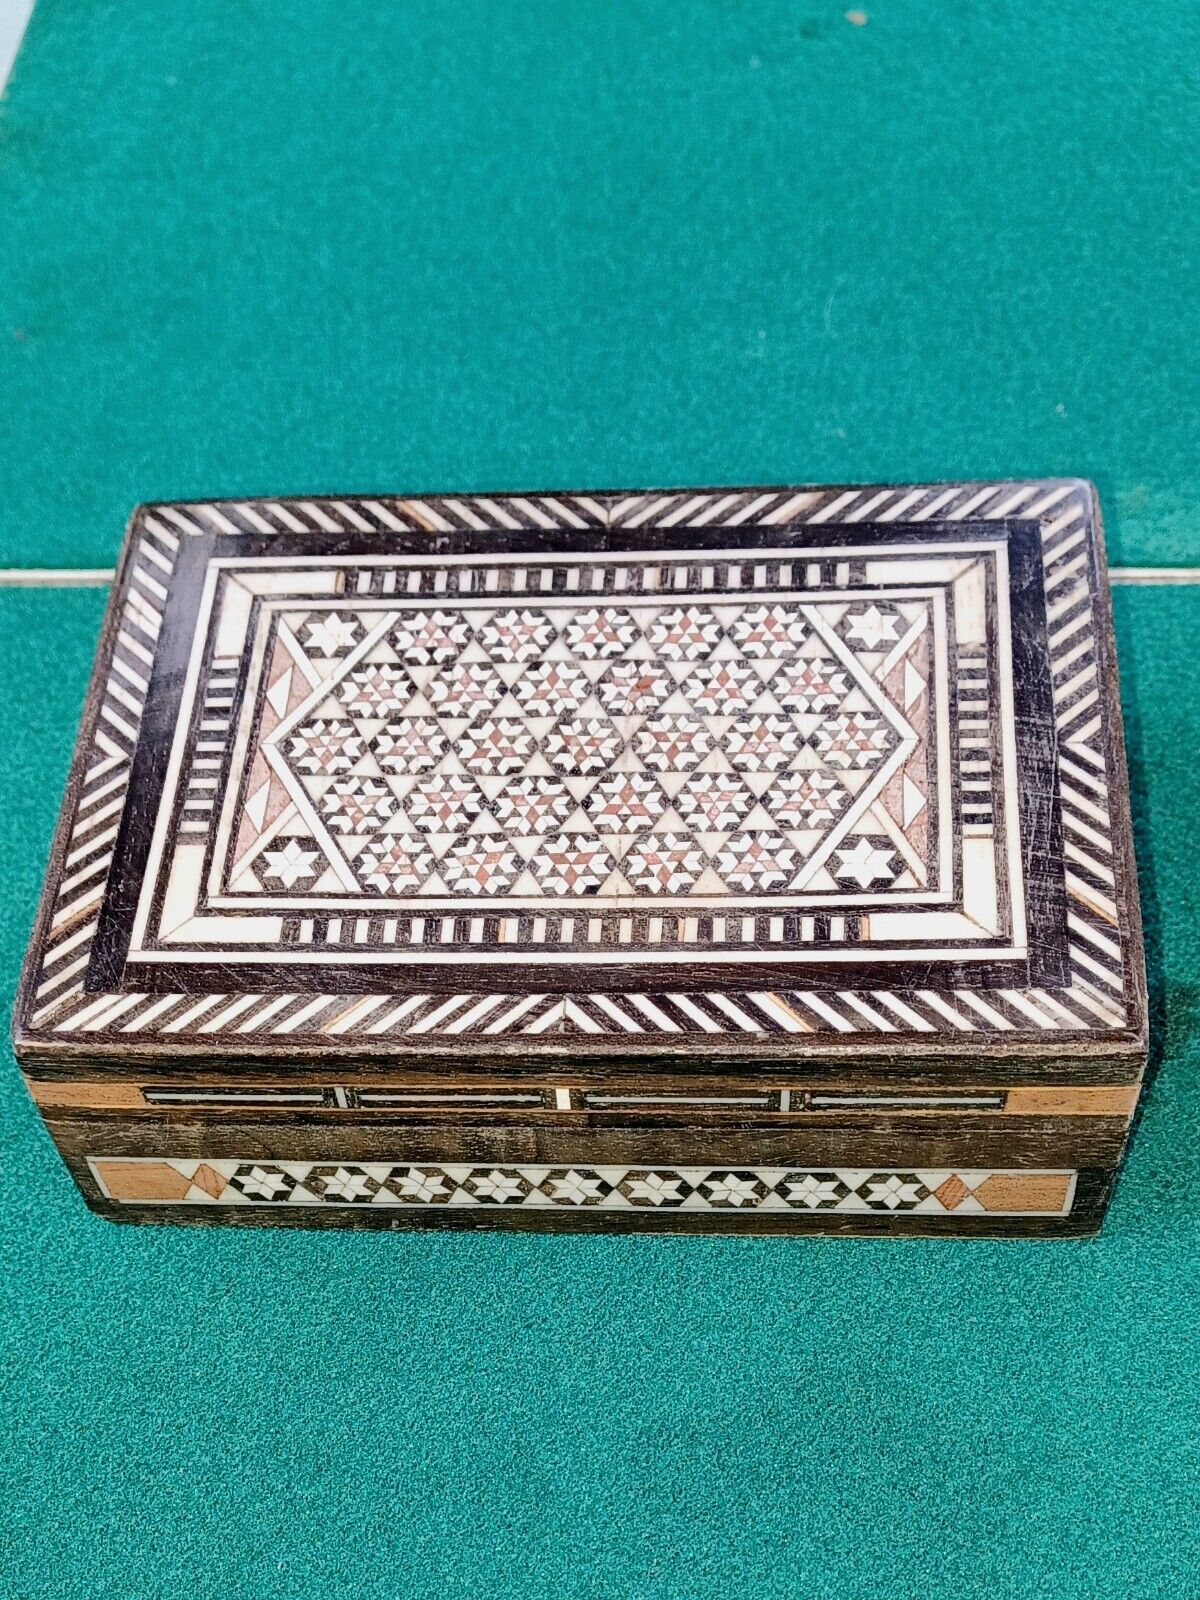 Vintage Wooden Box Wood Trinket Jewelry with Marquetry Inlay Parquetry